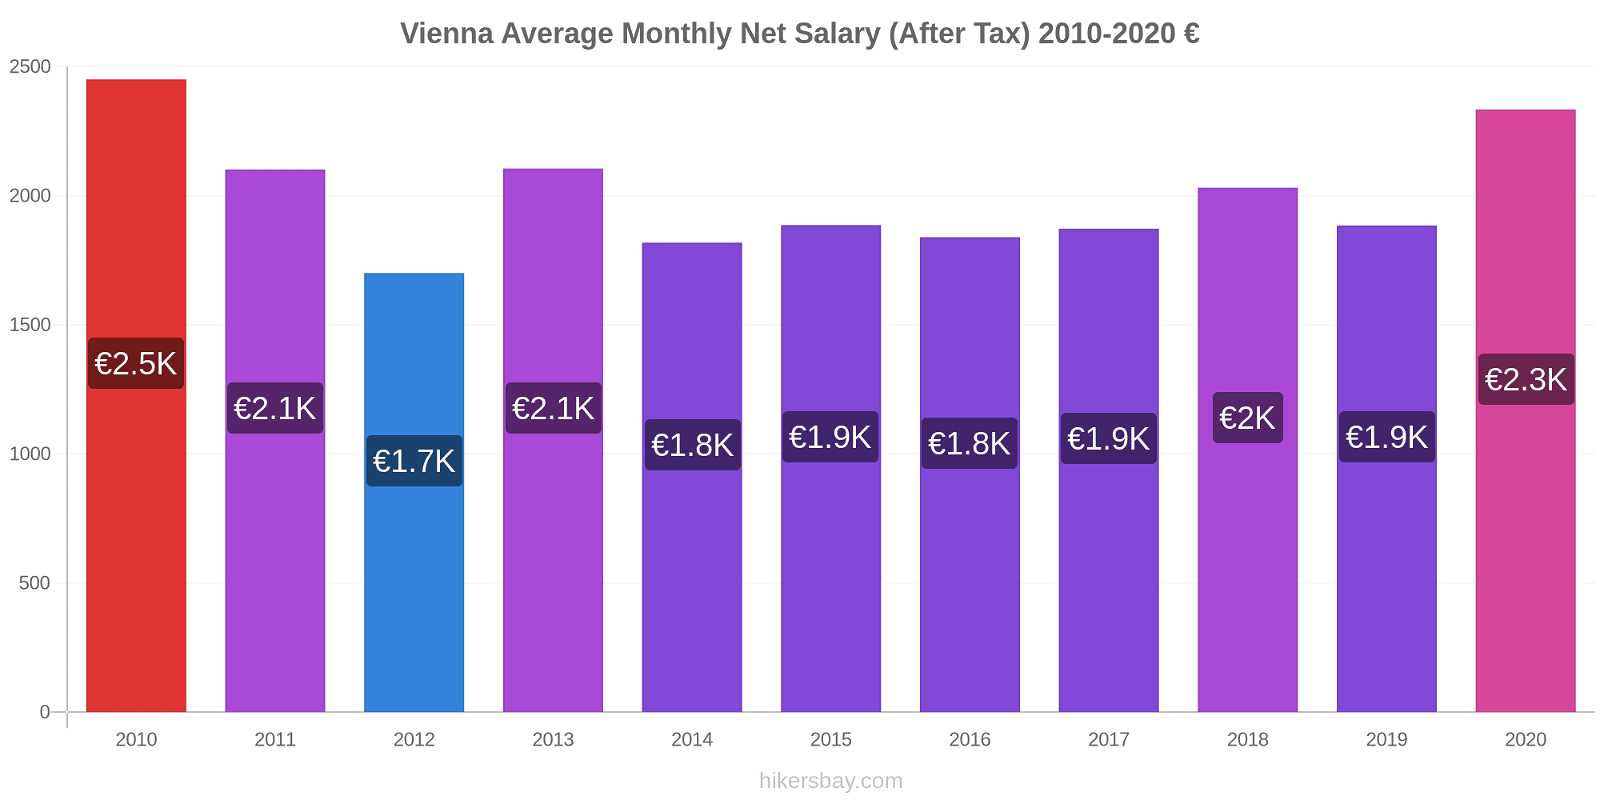 Vienna price changes Average Monthly Net Salary (After Tax) hikersbay.com